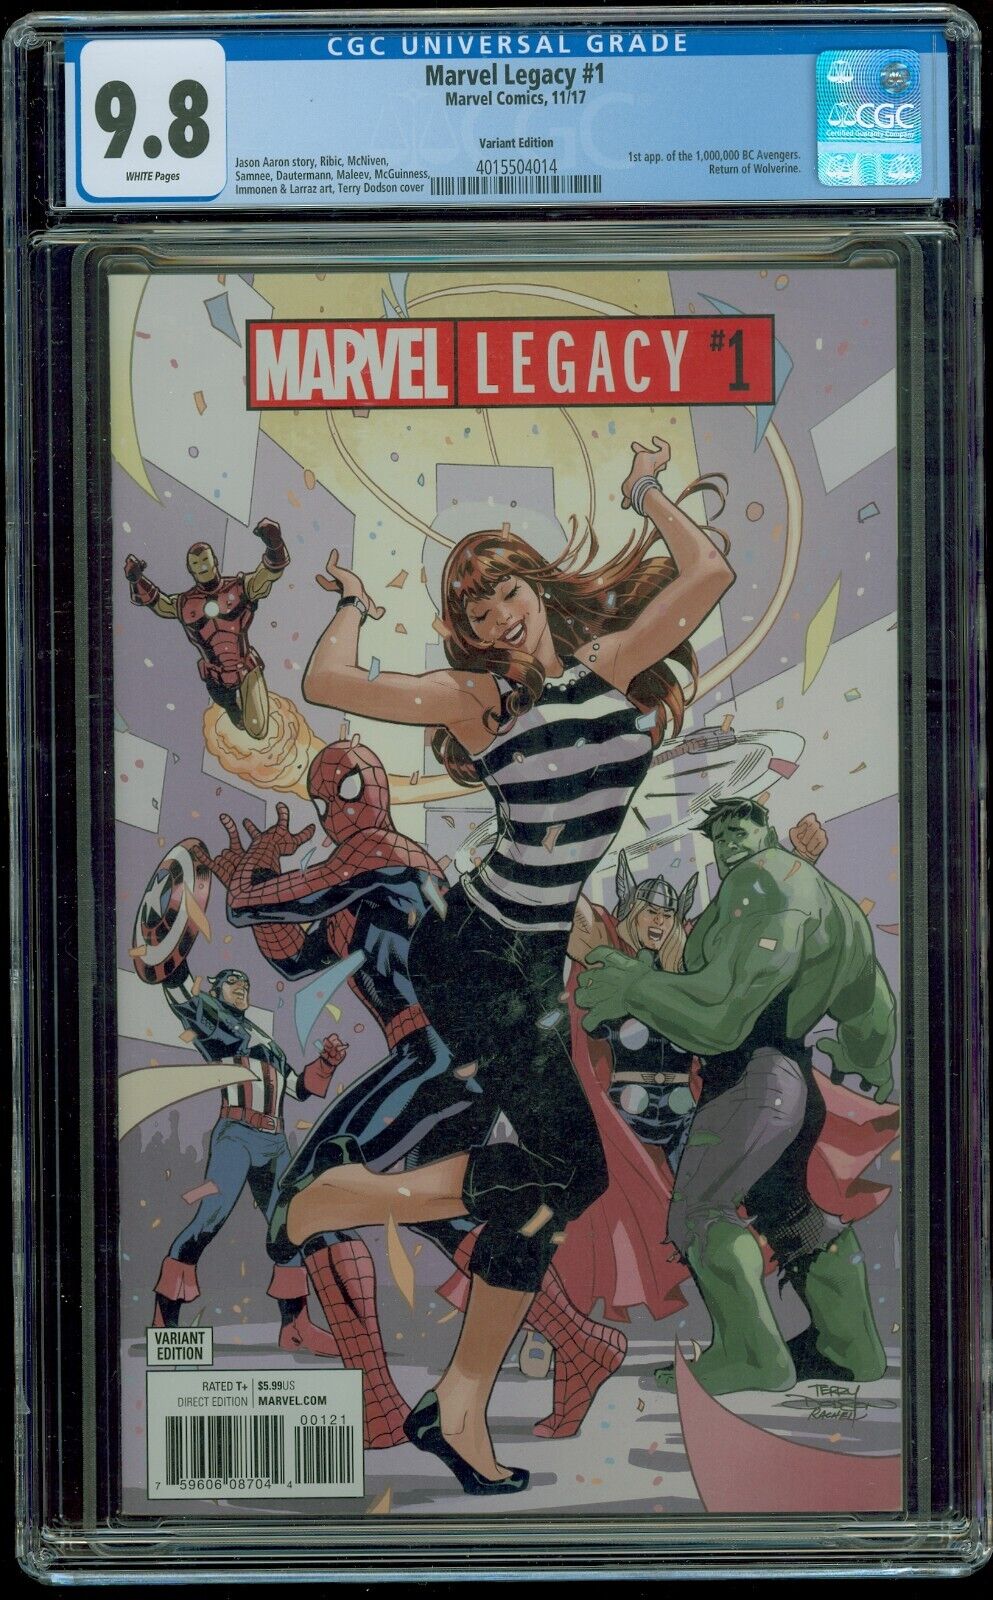 MARVEL LEGACY #1 (Marvel Comics 2017) DODSON Party Variant Cover CGC Graded 9.8